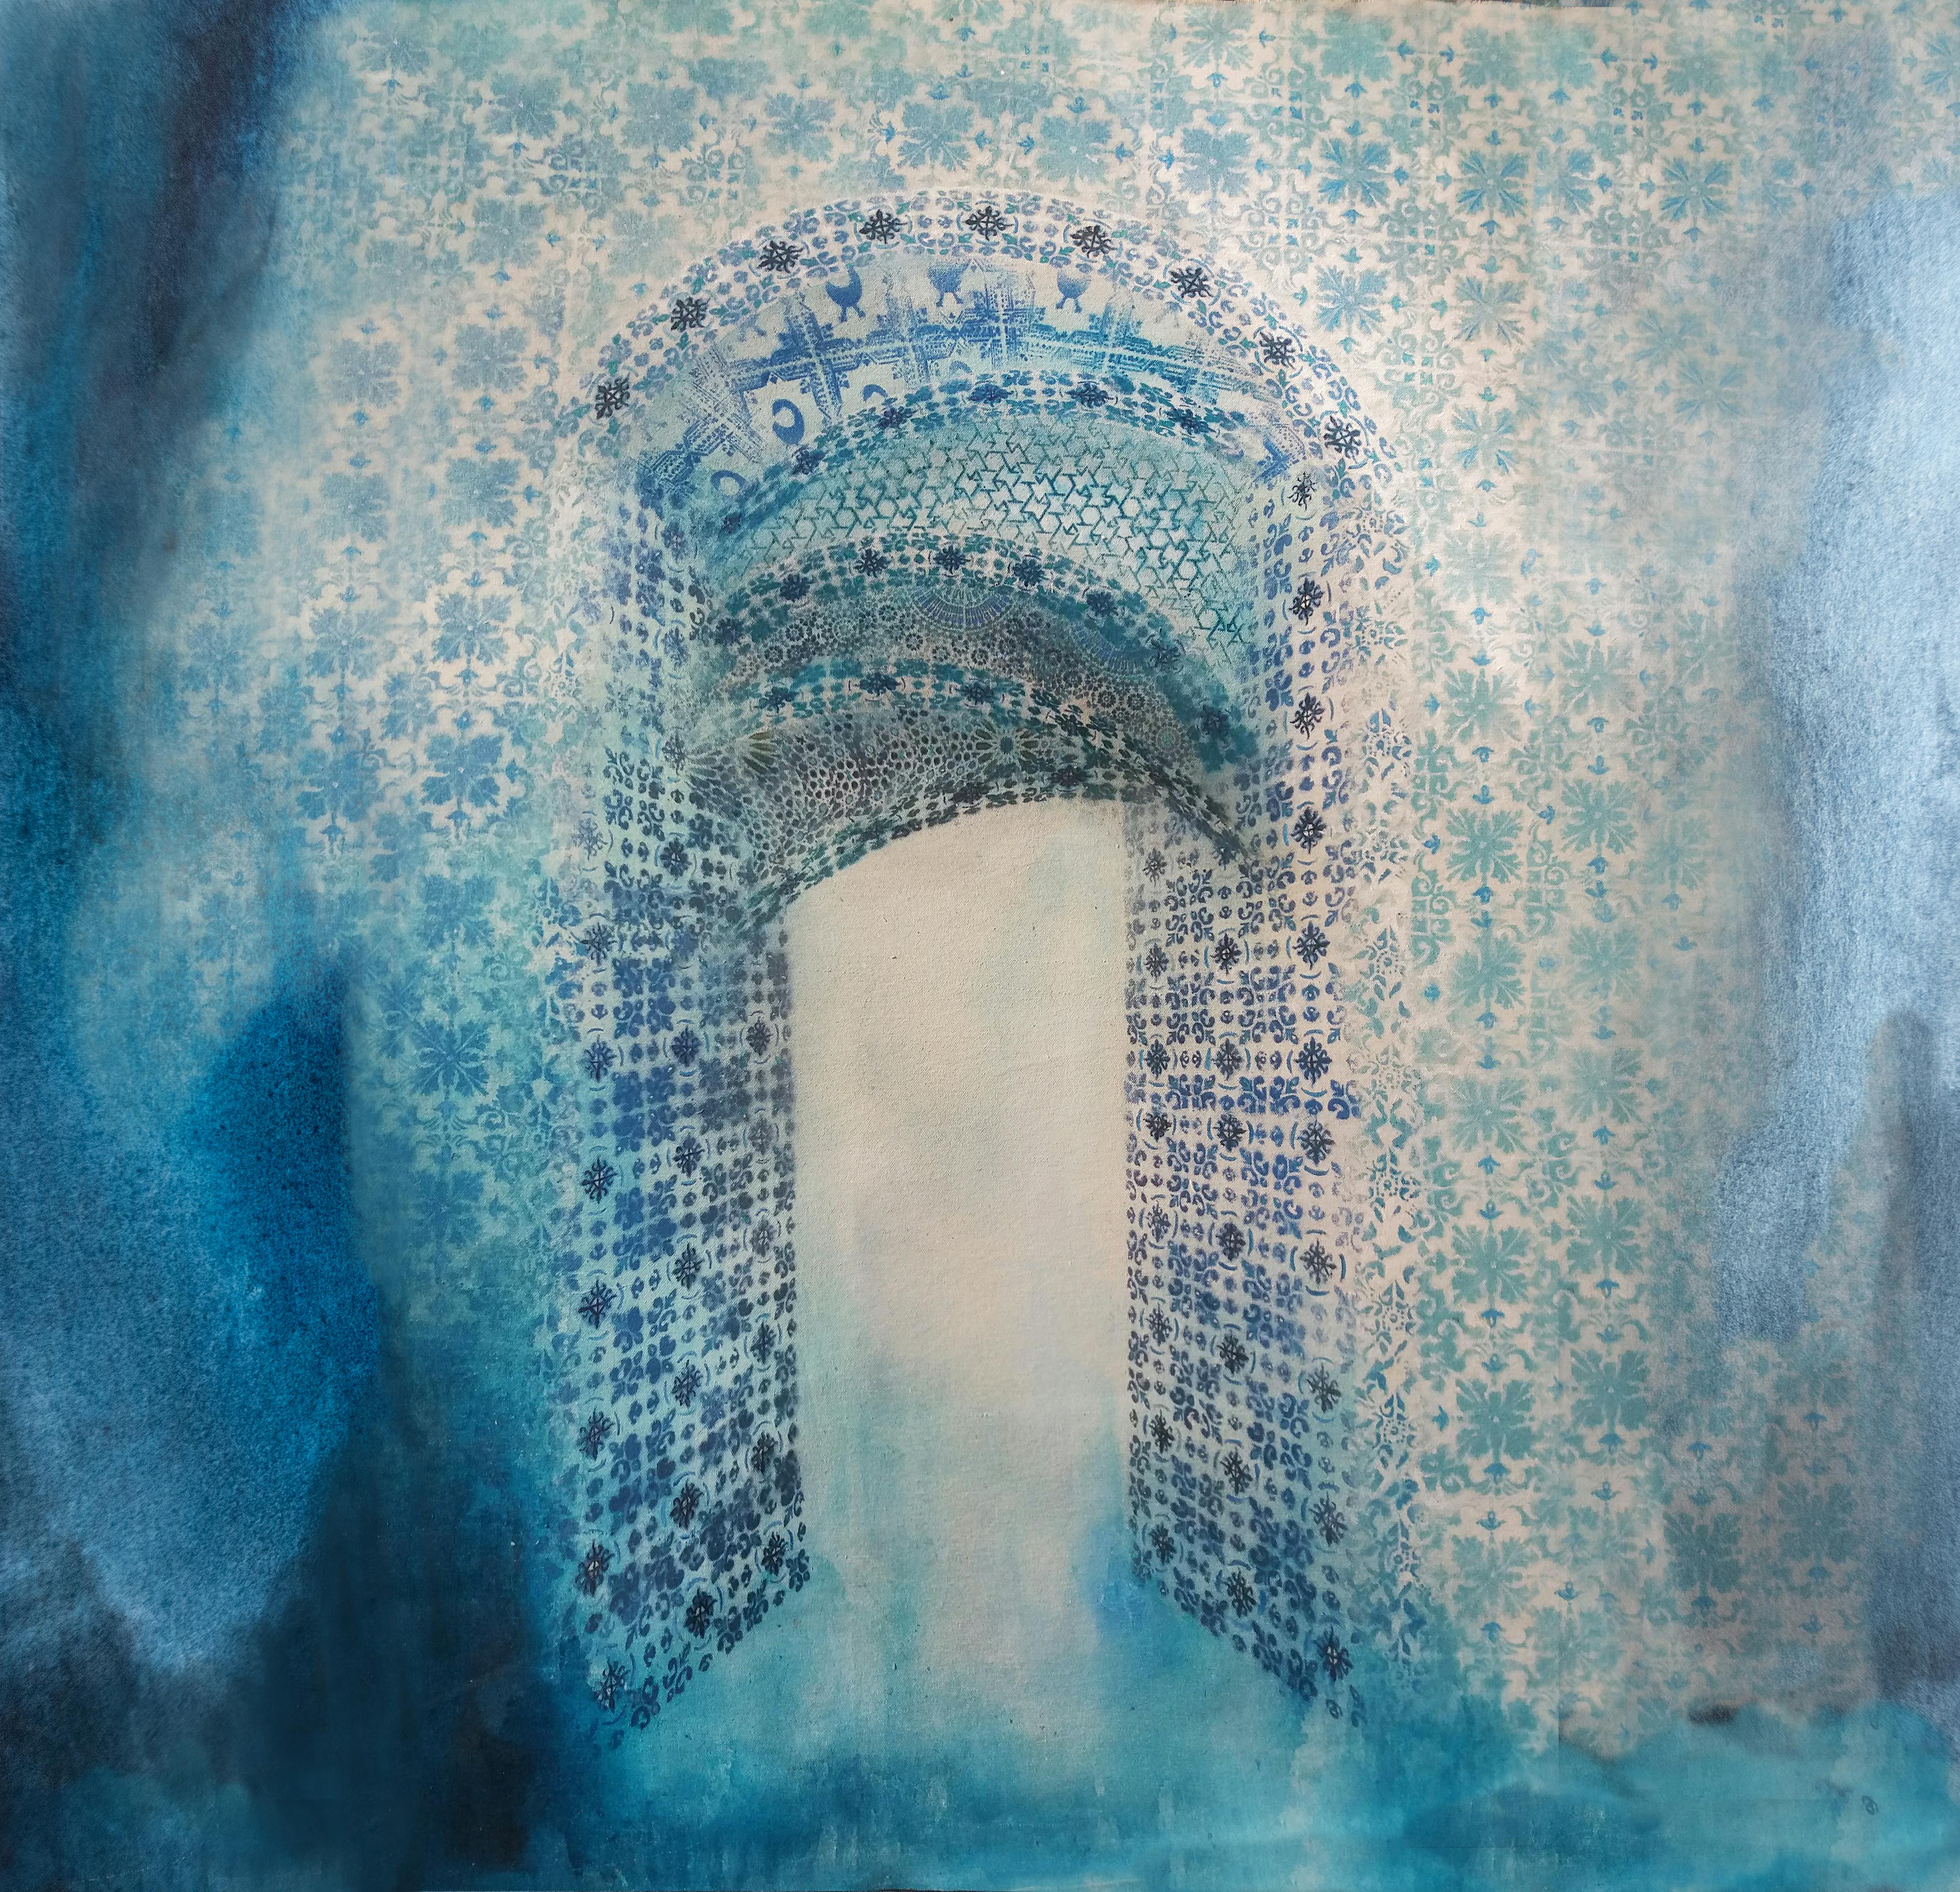 Blue and white archways, merging symbols from Portugal, Islamic world, China and two Adinkra symbols from West Africa. Painting made with laser cut stencils